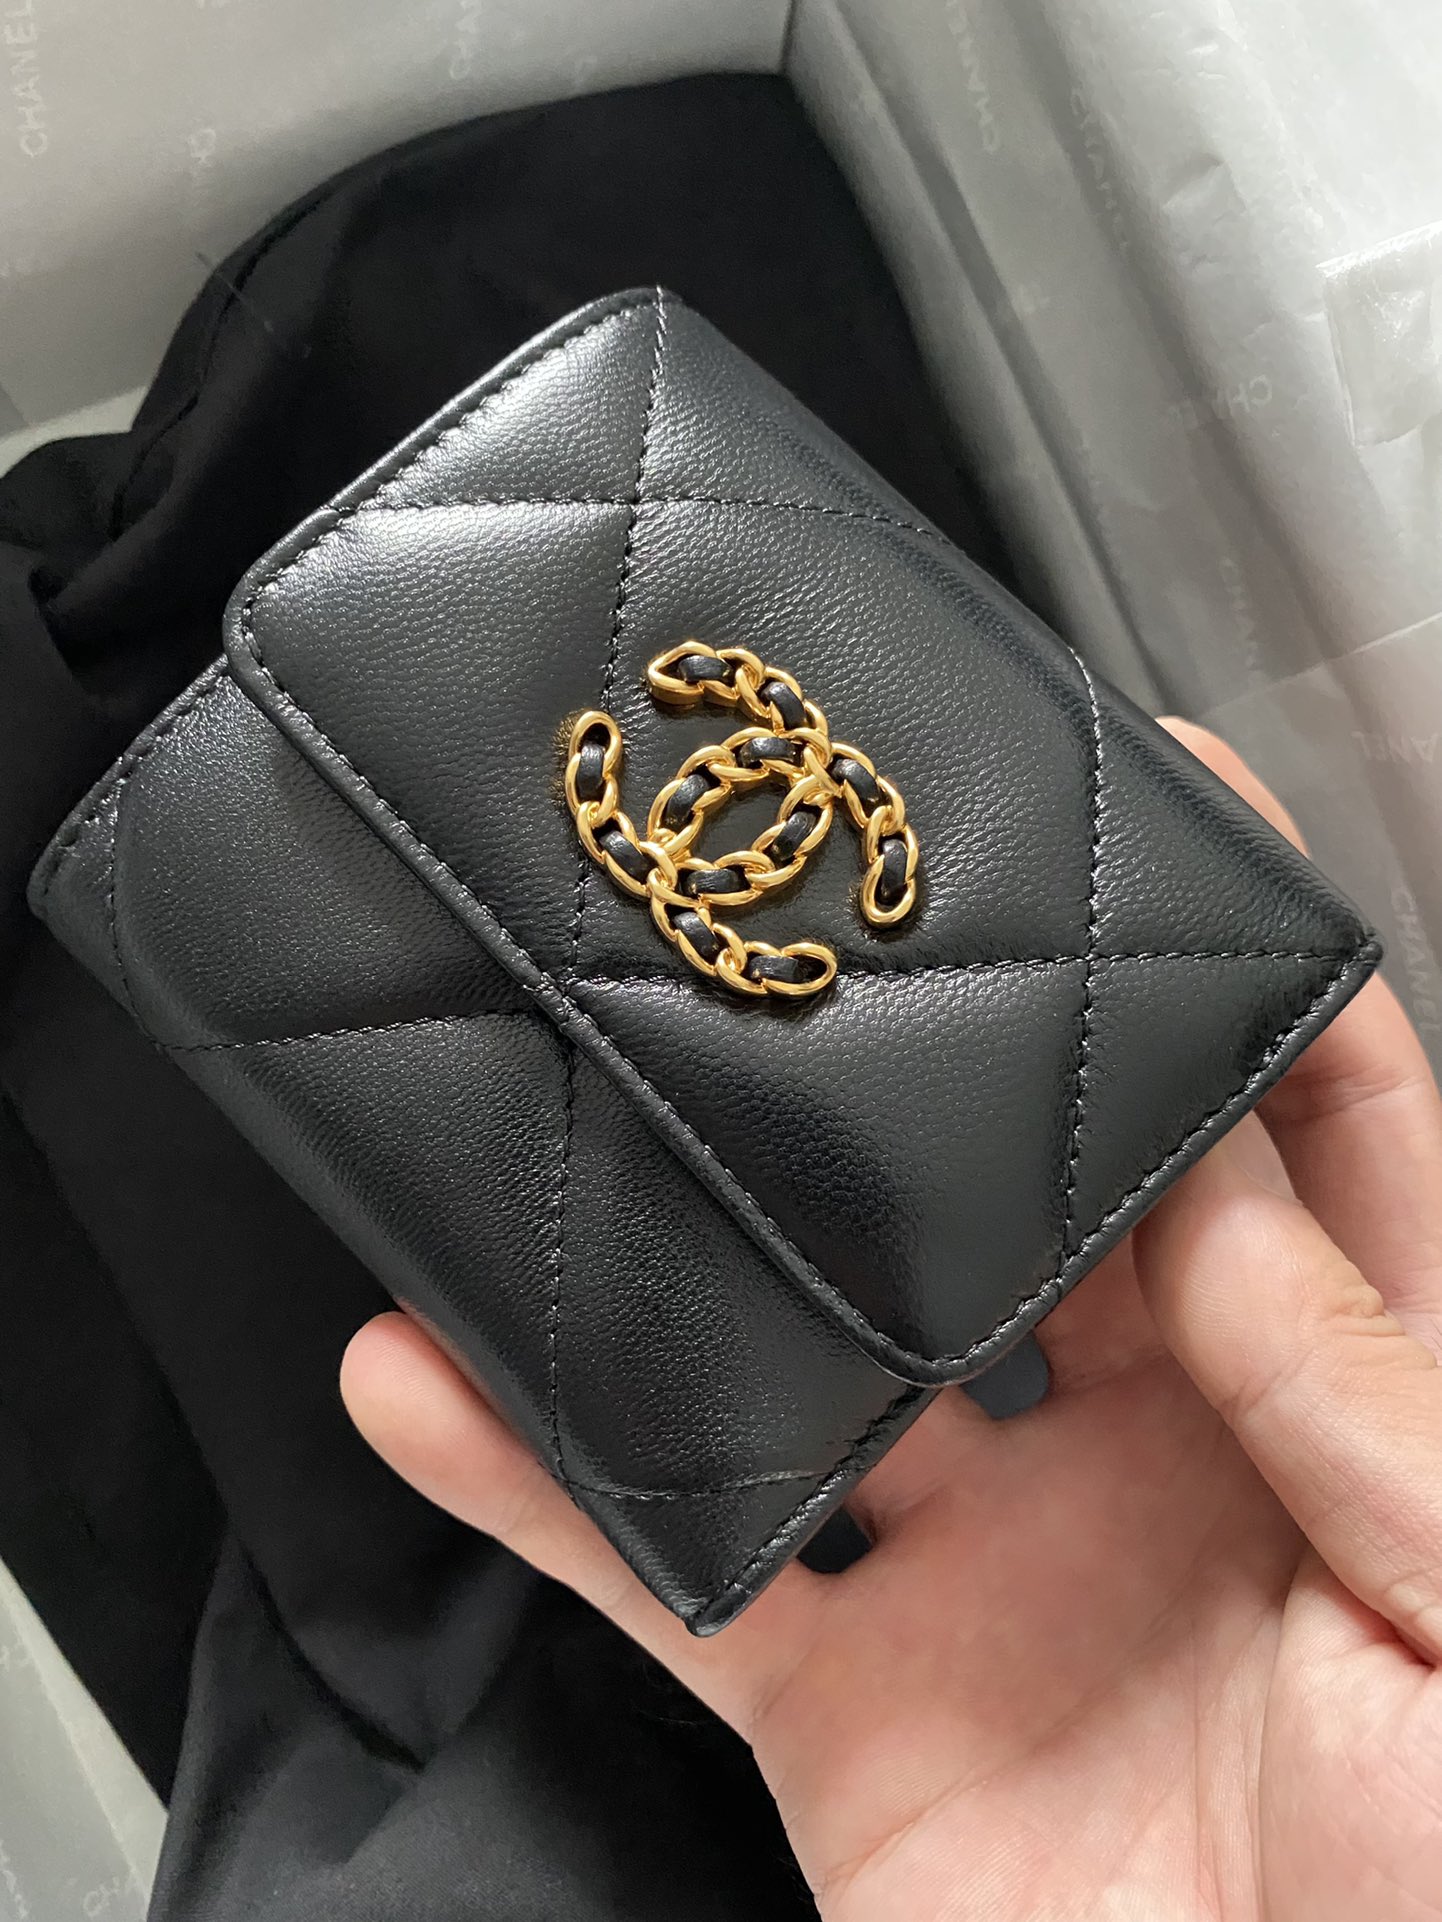 Ann Authentic  CardHolder Vip Gift Chanel  Hàng tặng  Facebook